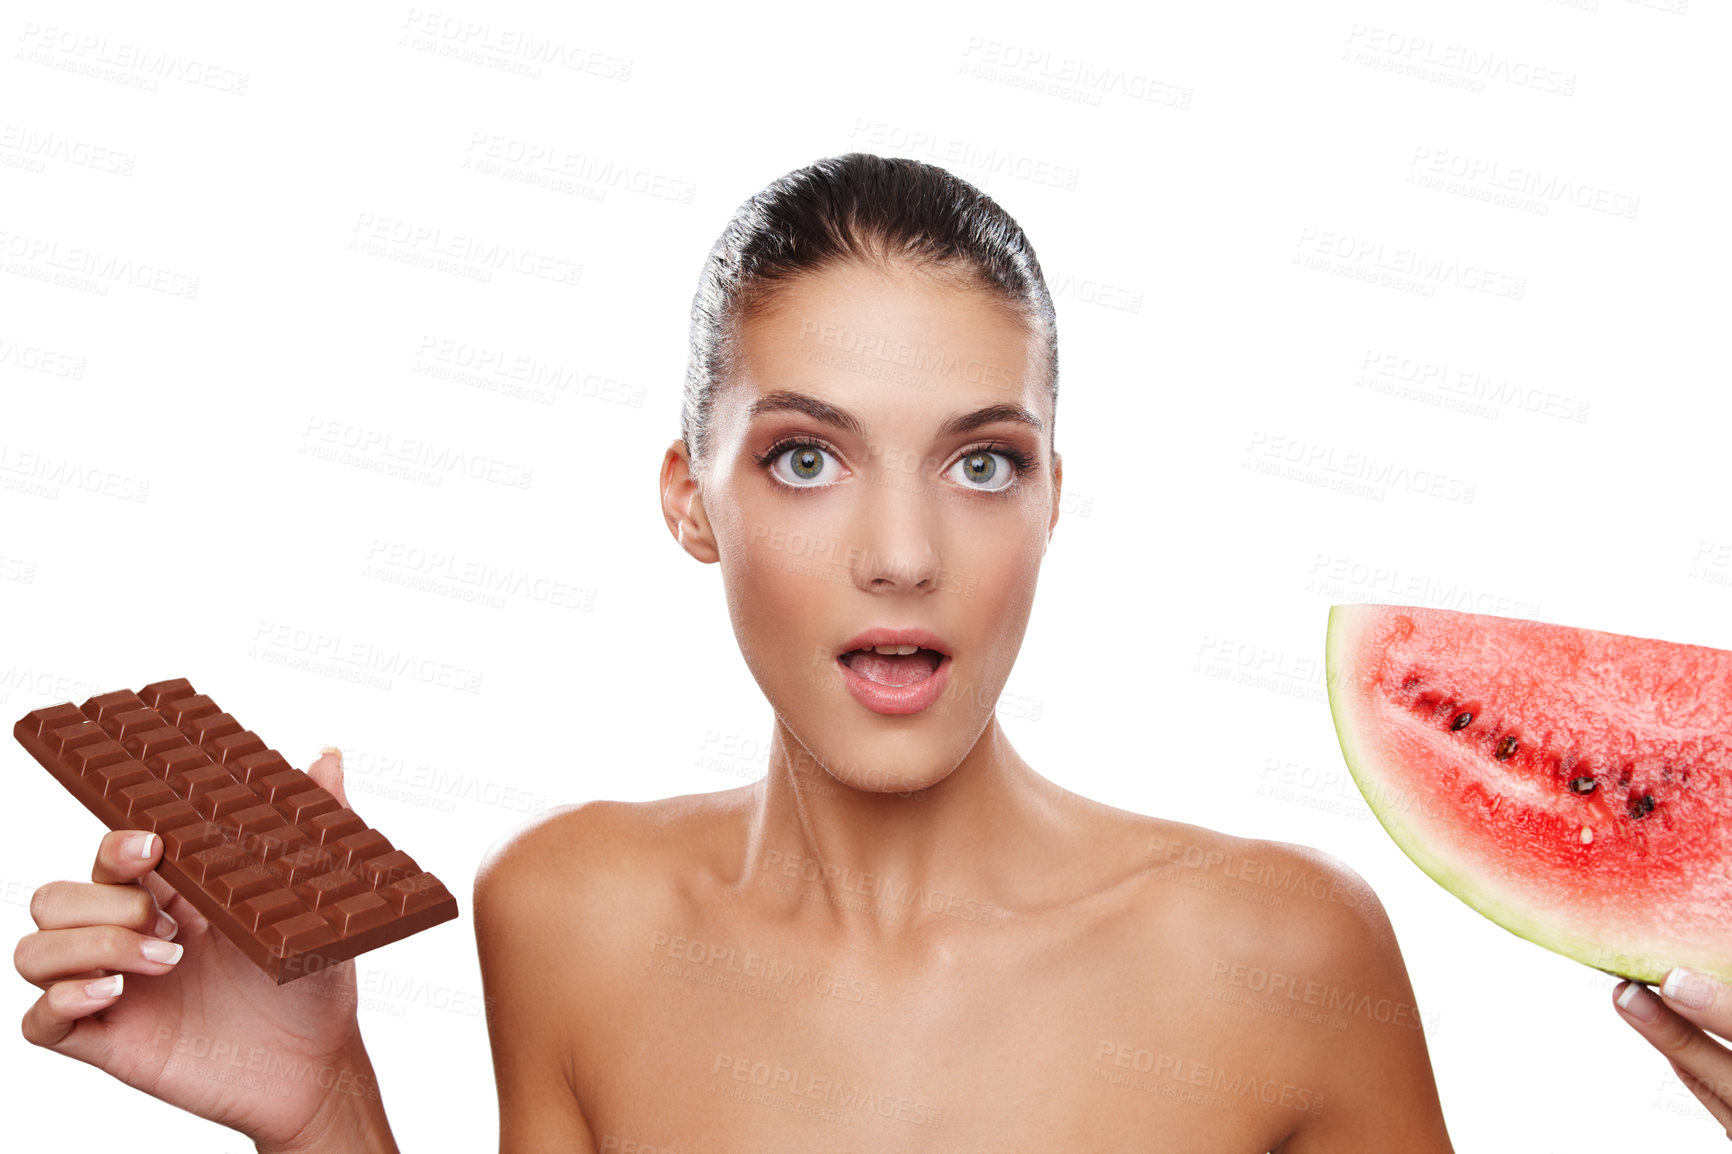 Buy stock photo Studio shot of a young woman unable to decide between a slab of chocolate or a piece of watermelon